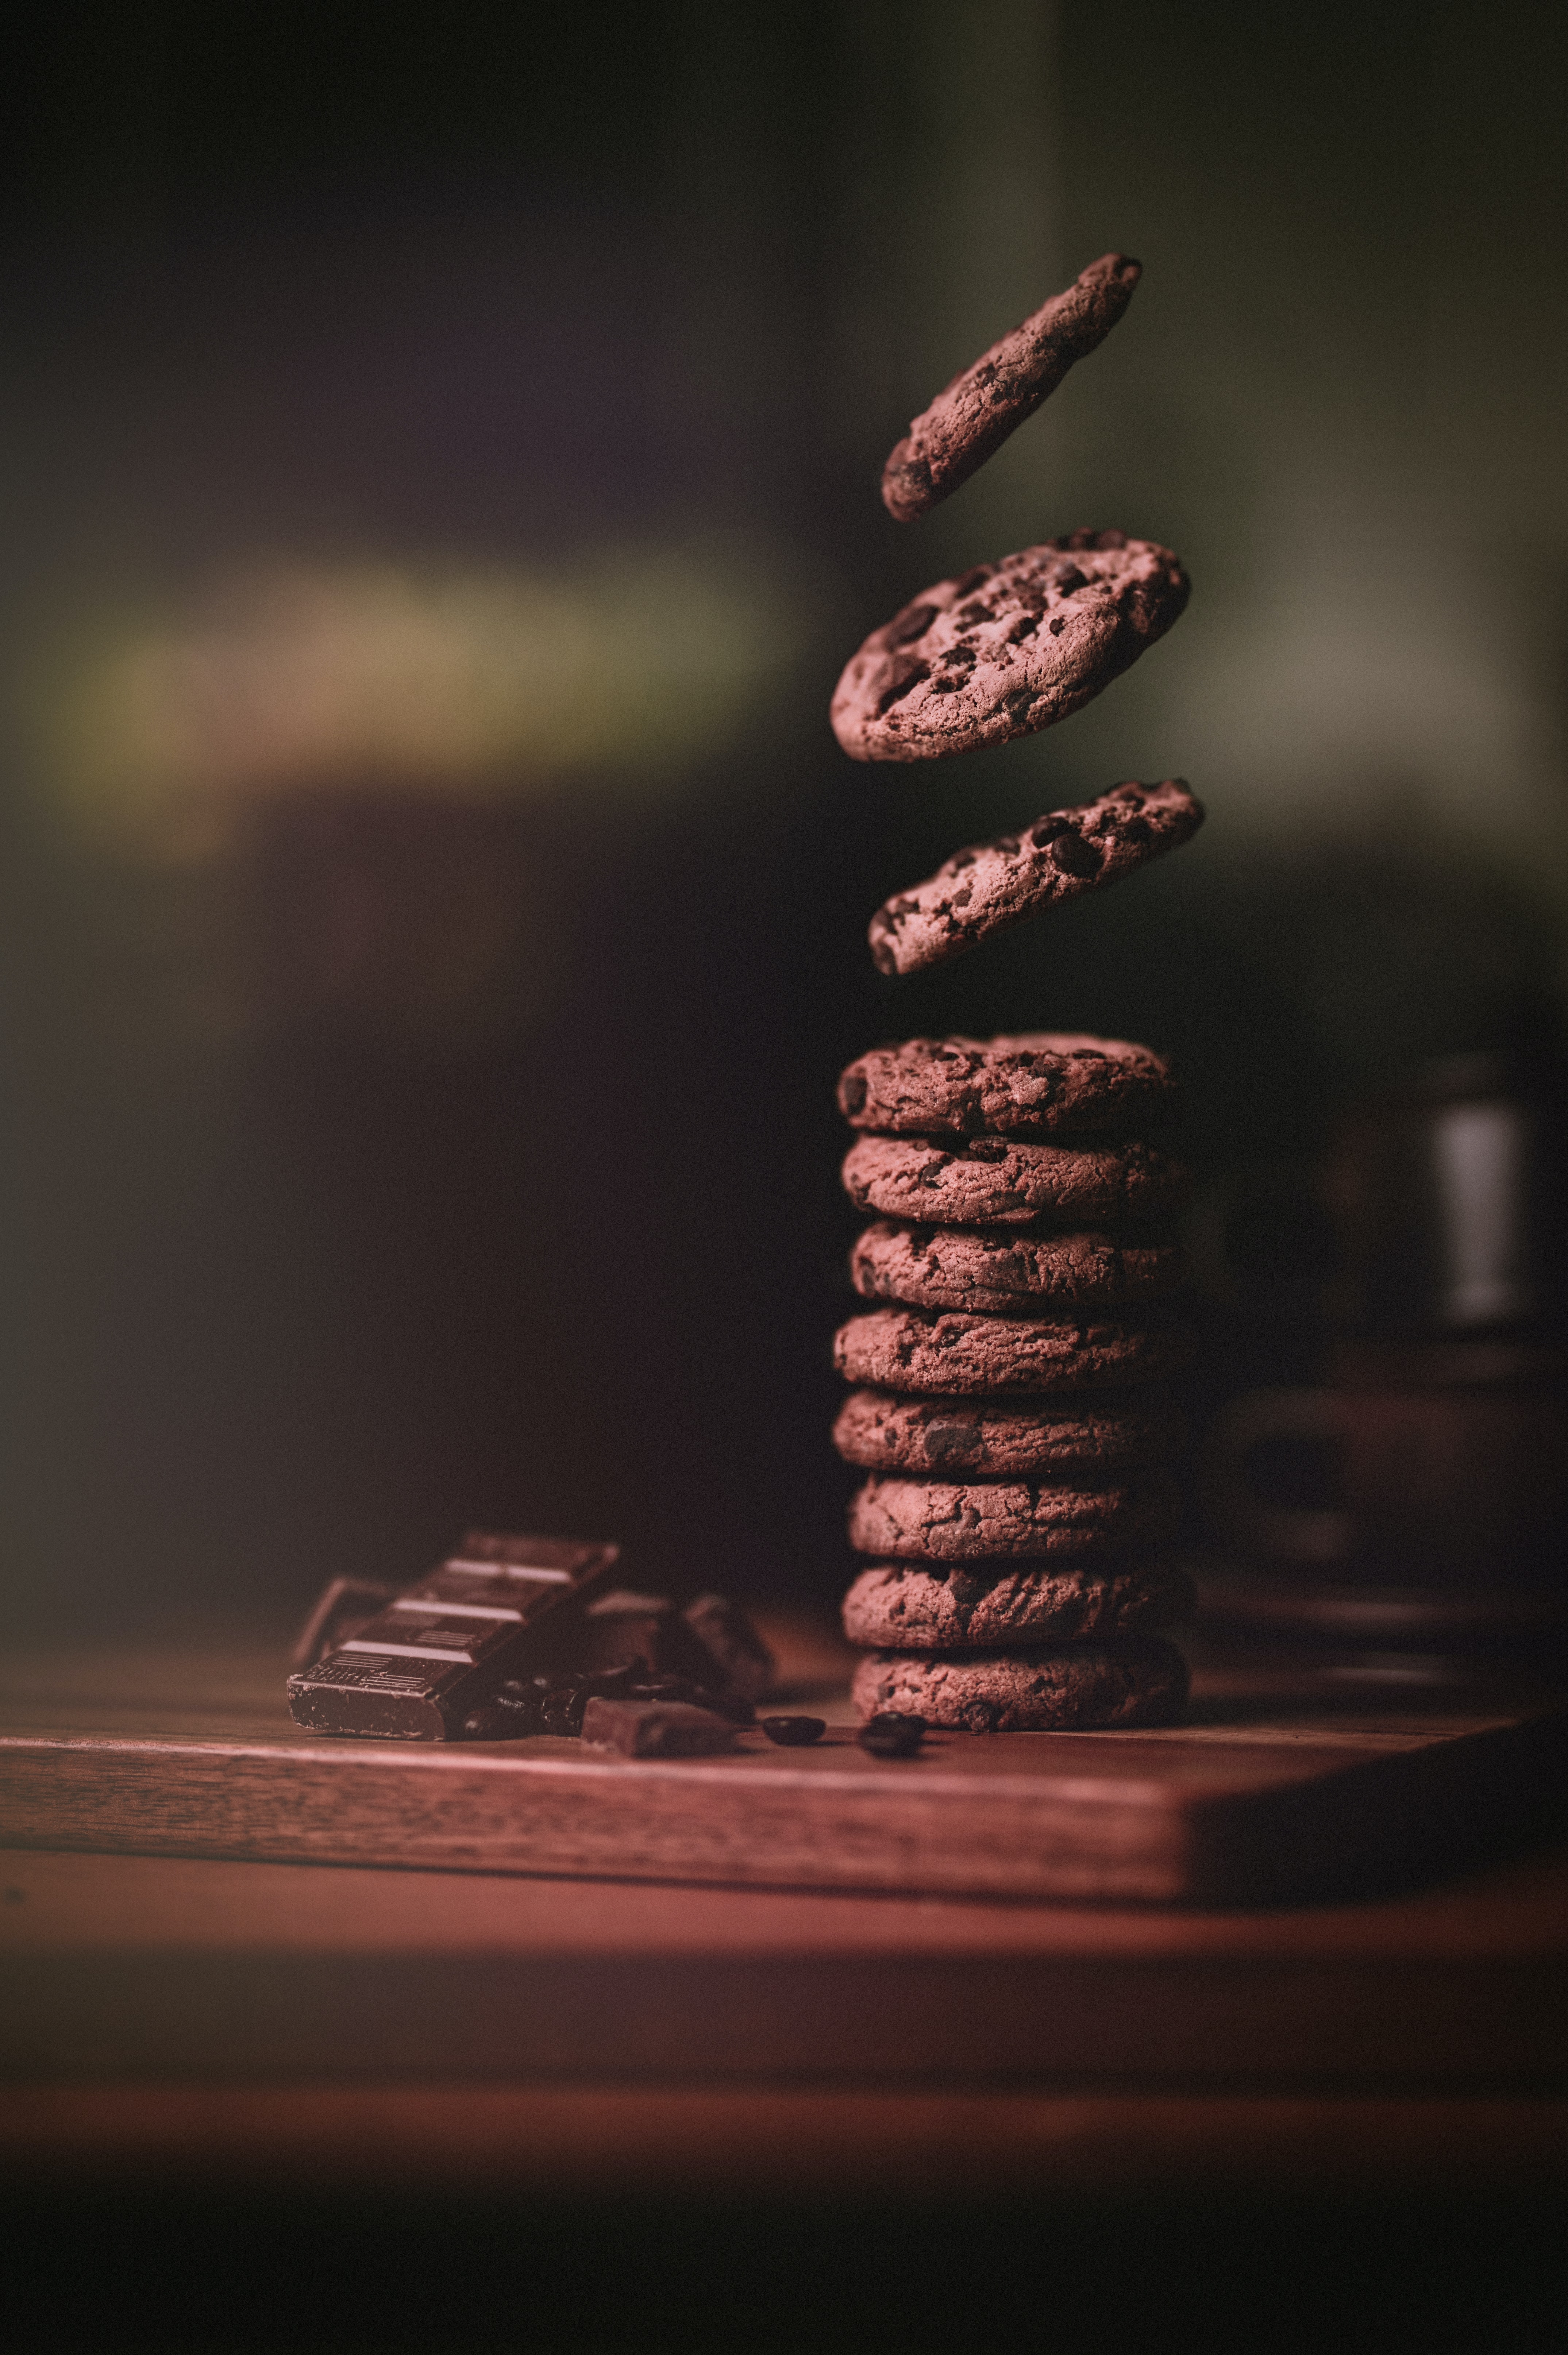 baking, food, chocolate, cookies, bakery products, levitation cell phone wallpapers